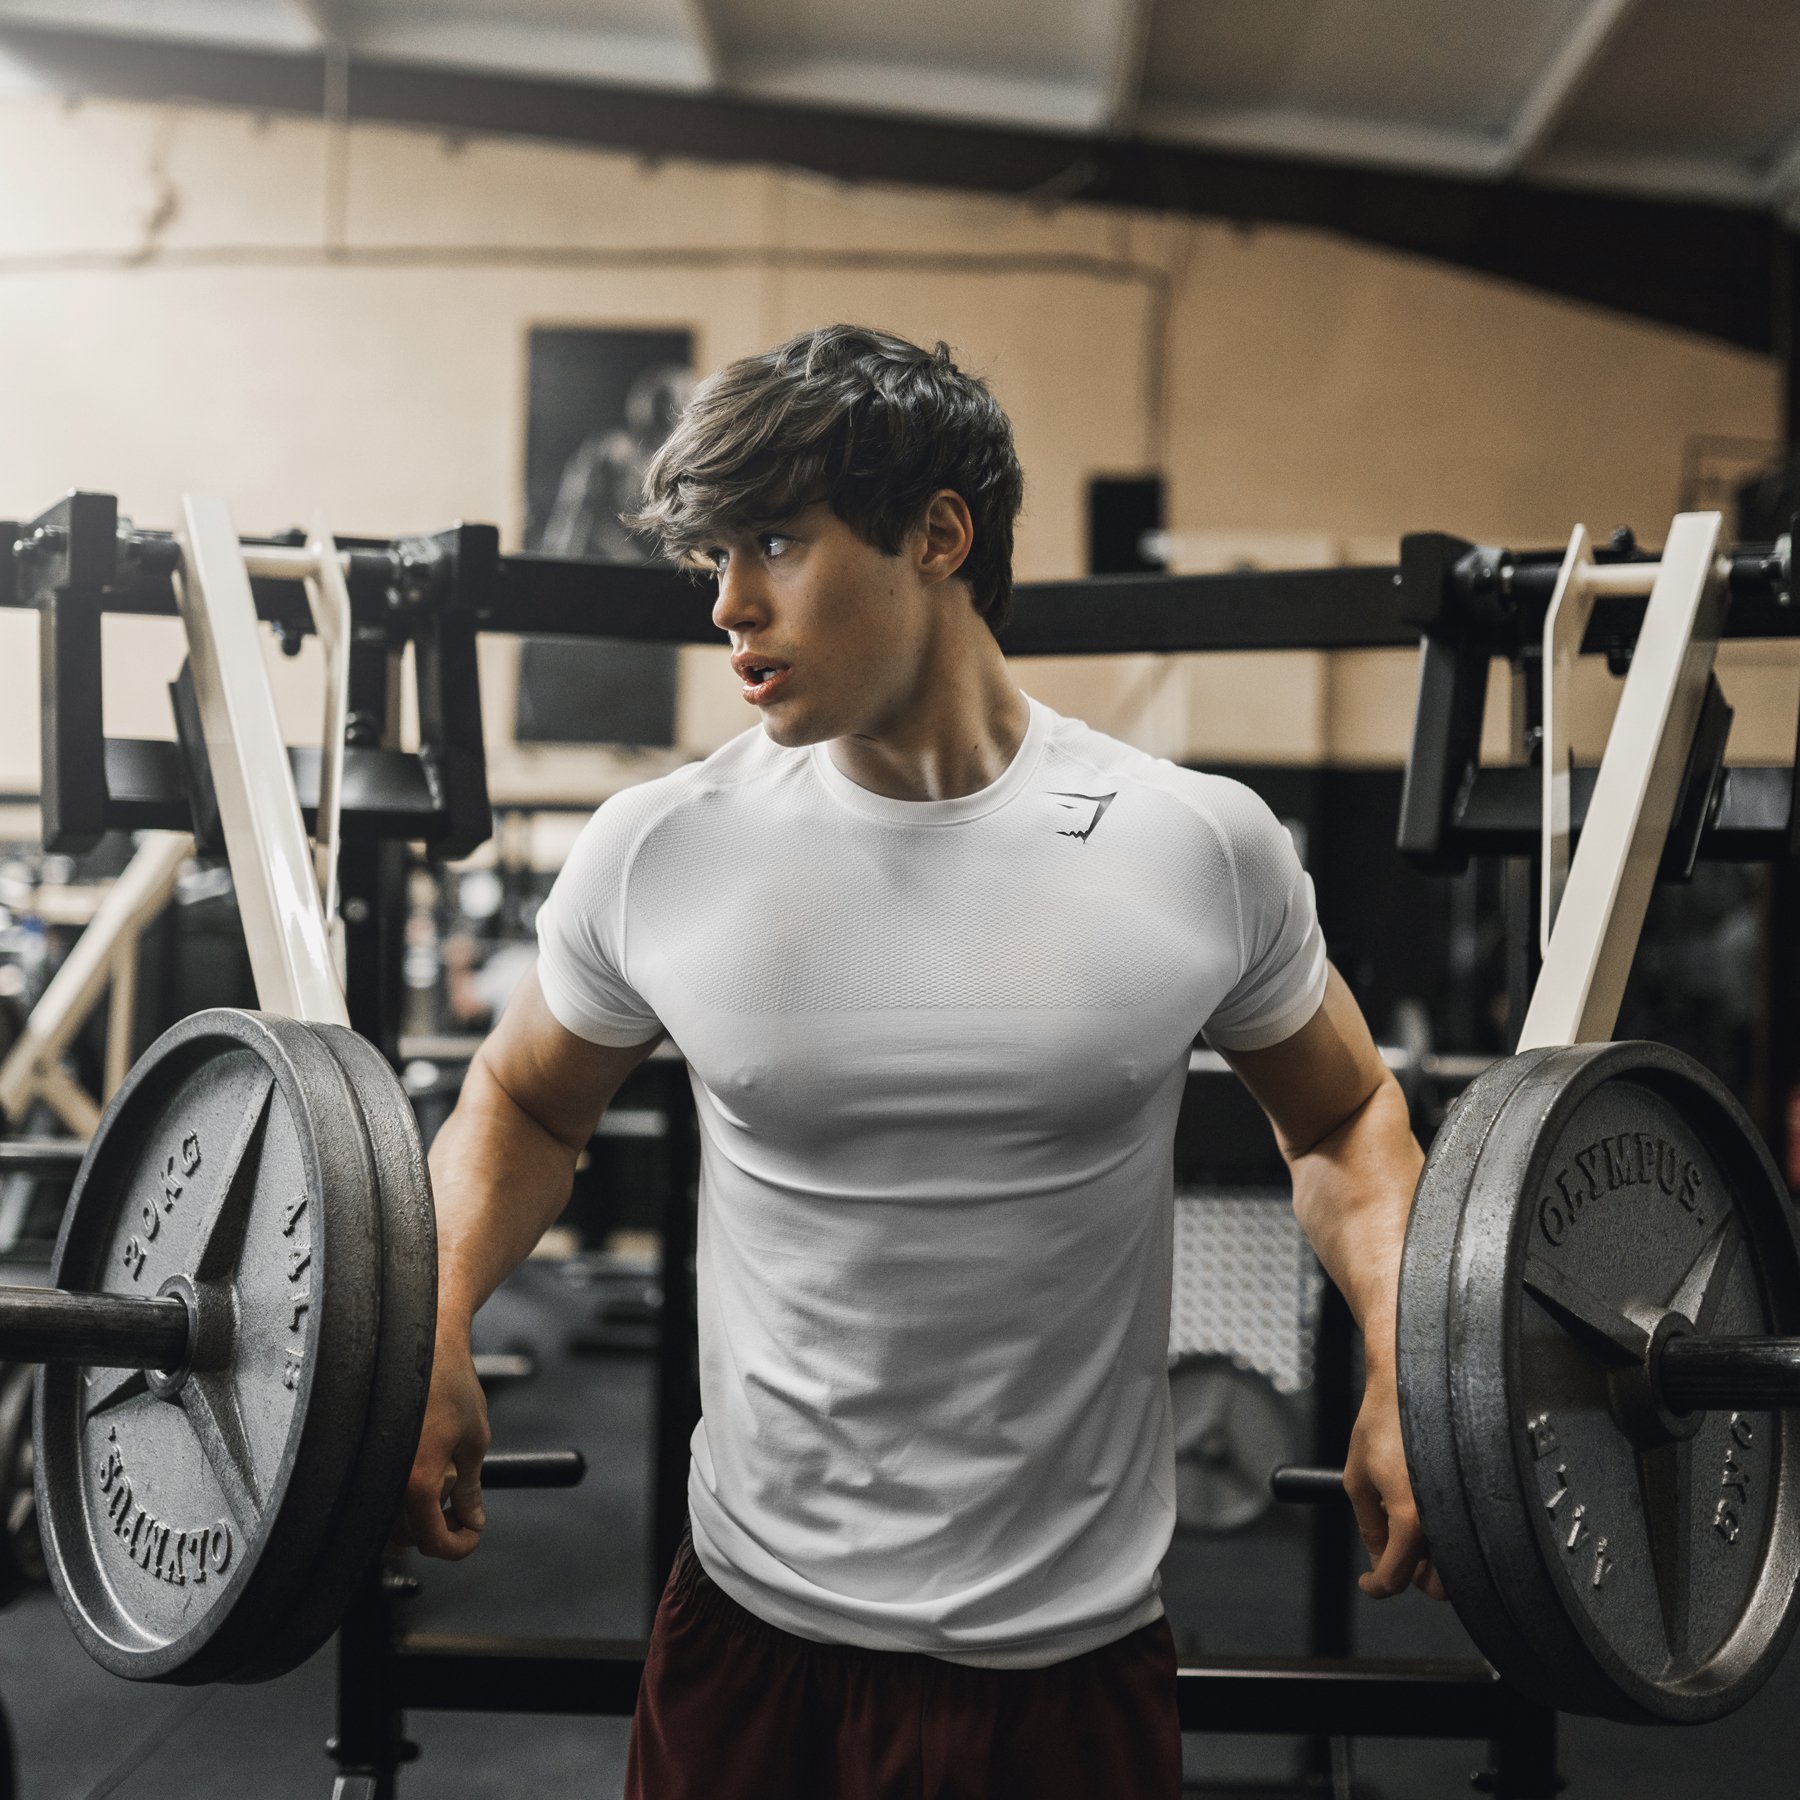 Gymshark on X: Perform better. Take your workout to the extreme